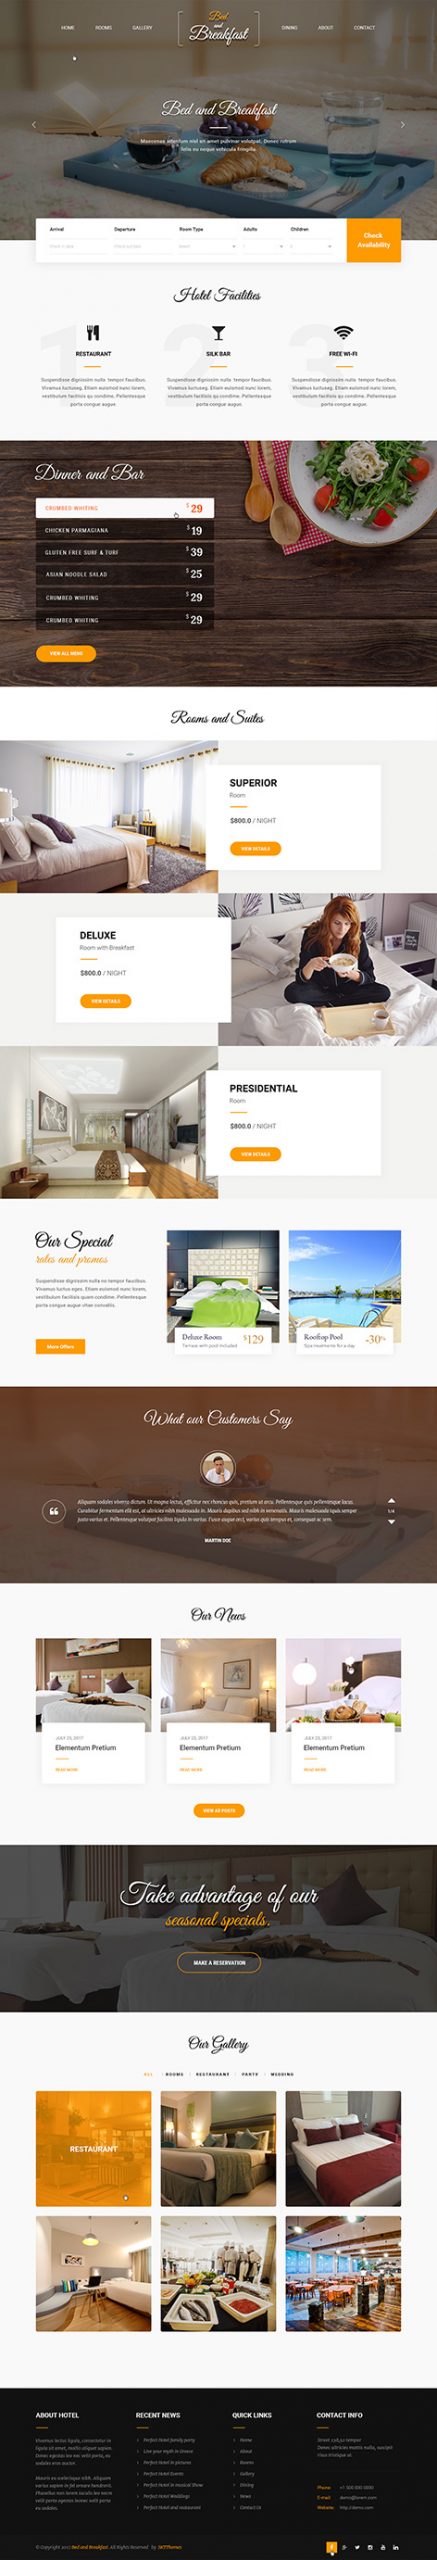 bed and breakfast wordpress theme1 scaled